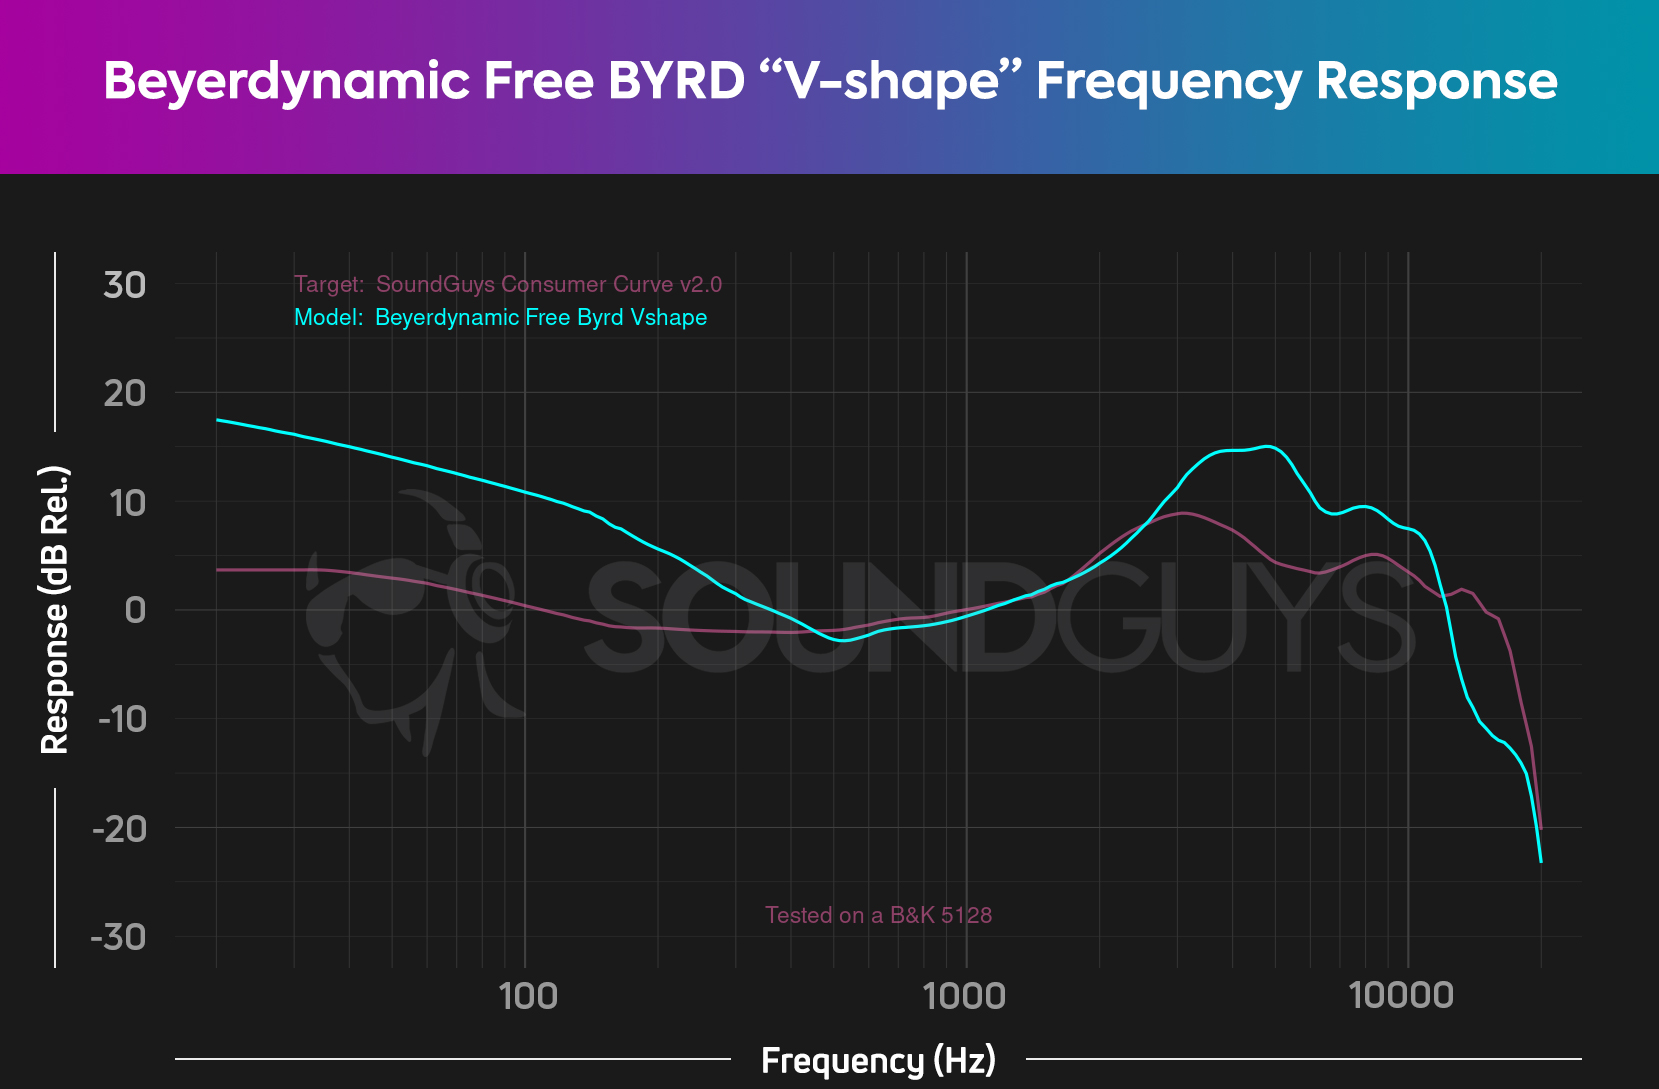 A chart depicts the Beyerdynamic Free BYRD frequency response with the V-Shape EQ preset enabled, showing that it boosts bass even more than the default response.